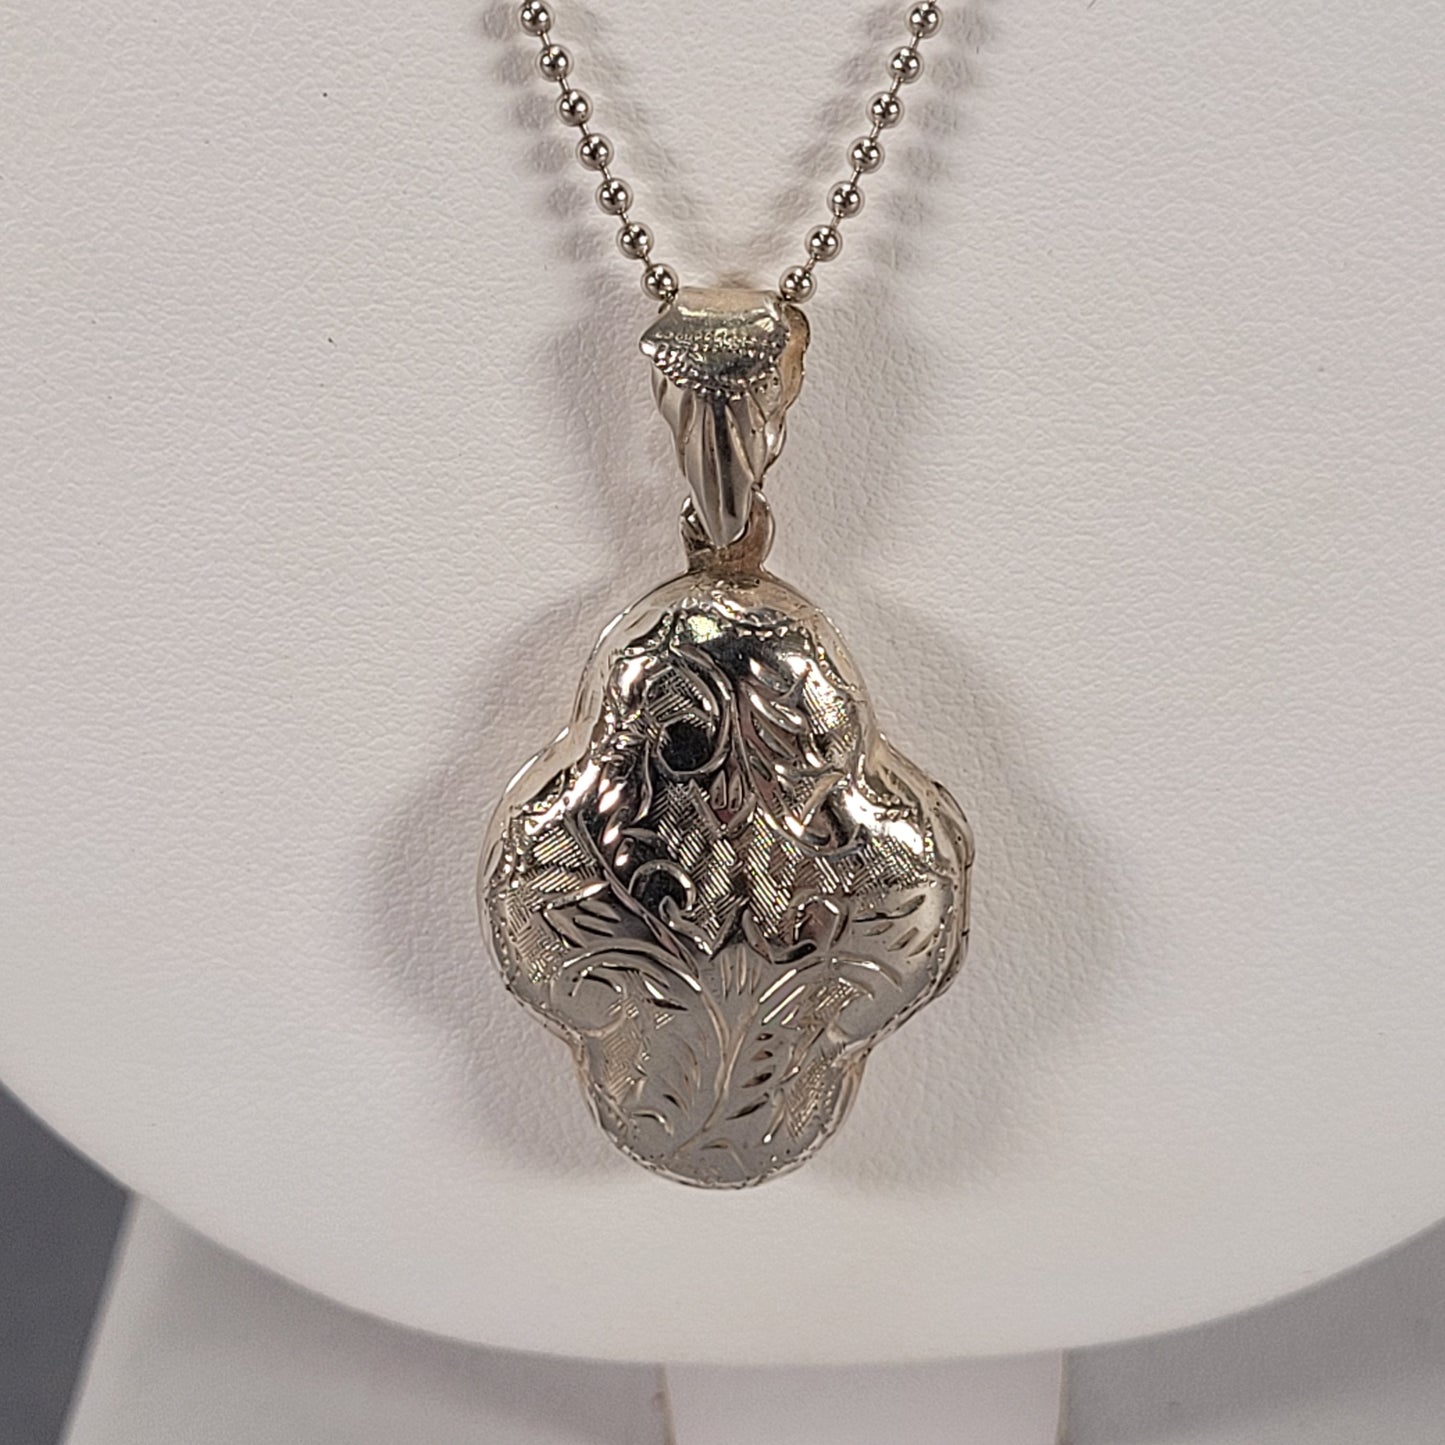 18" Sterling Silver Chain And Locket 7.8g